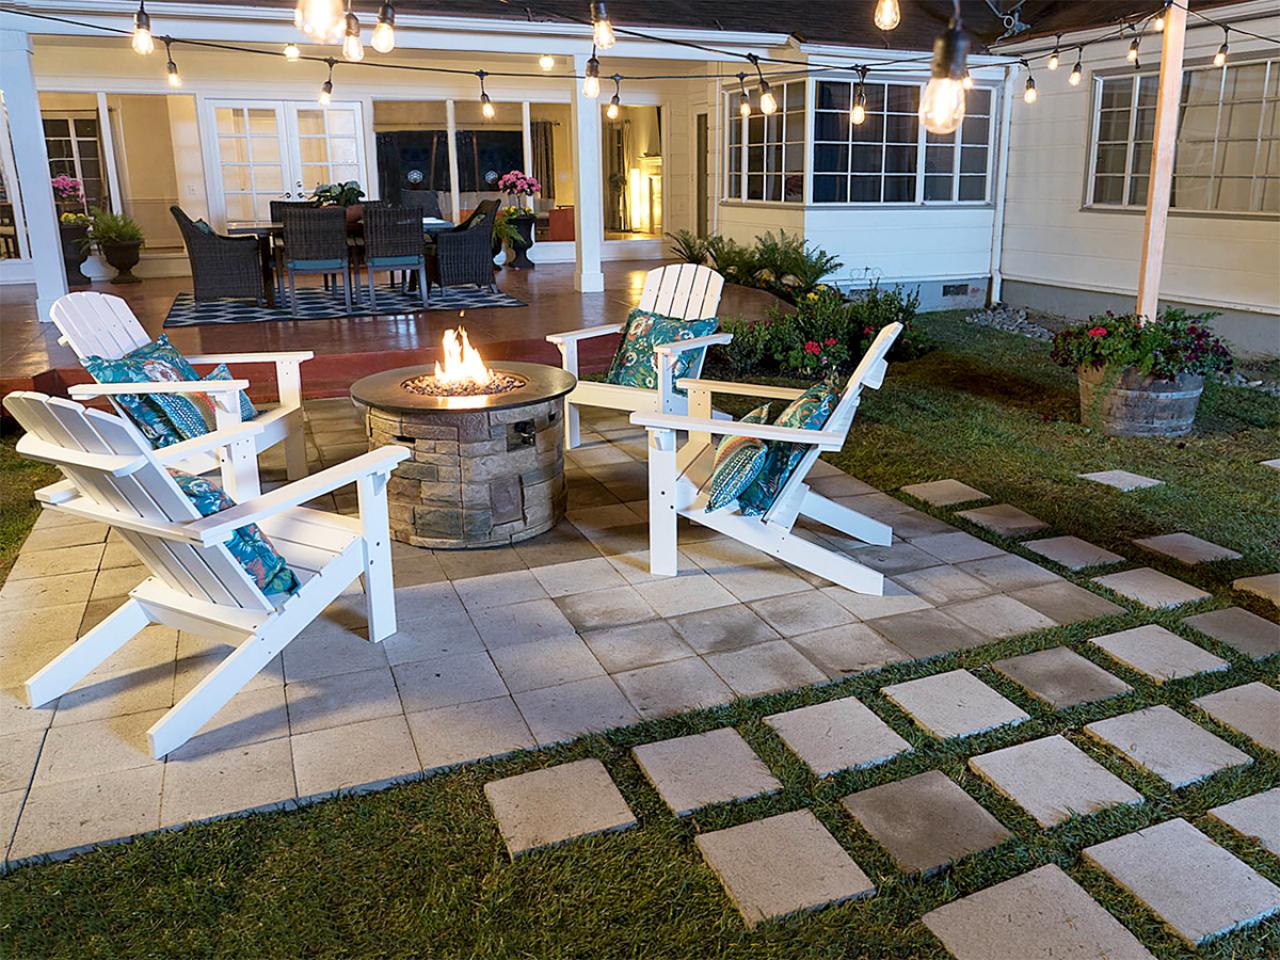 How To Lay A Paver Patio For Firepit, Fire Pit Concrete Pavers